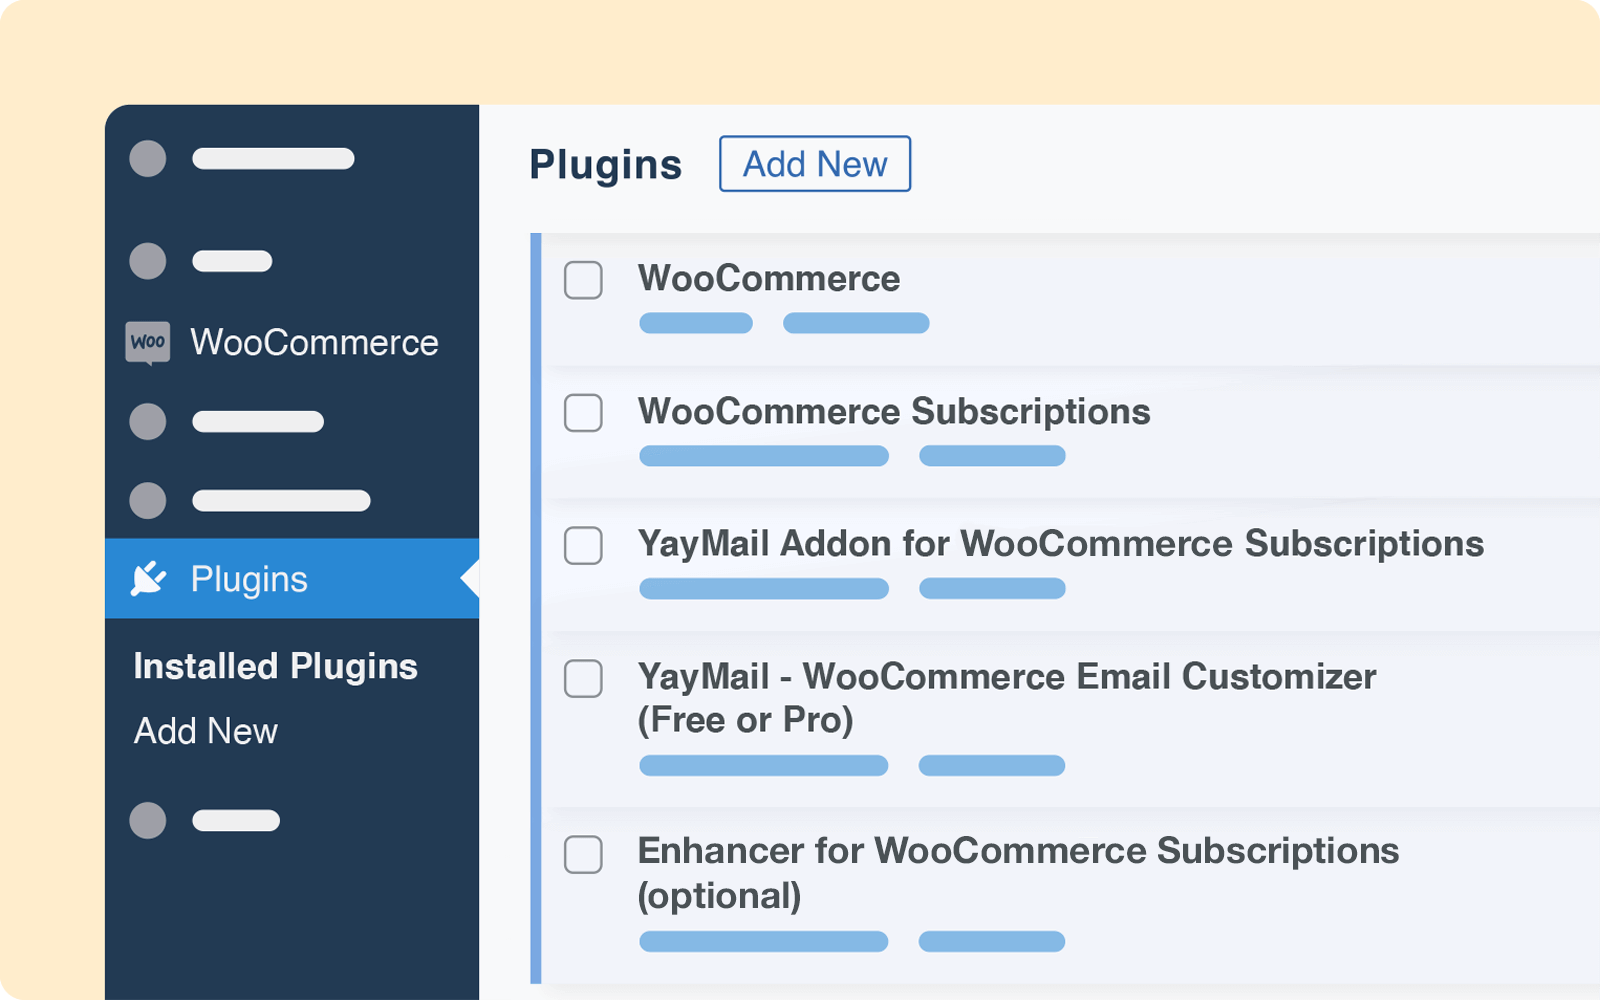 Activate woocommerce subscriptions and recurring payments email customizer